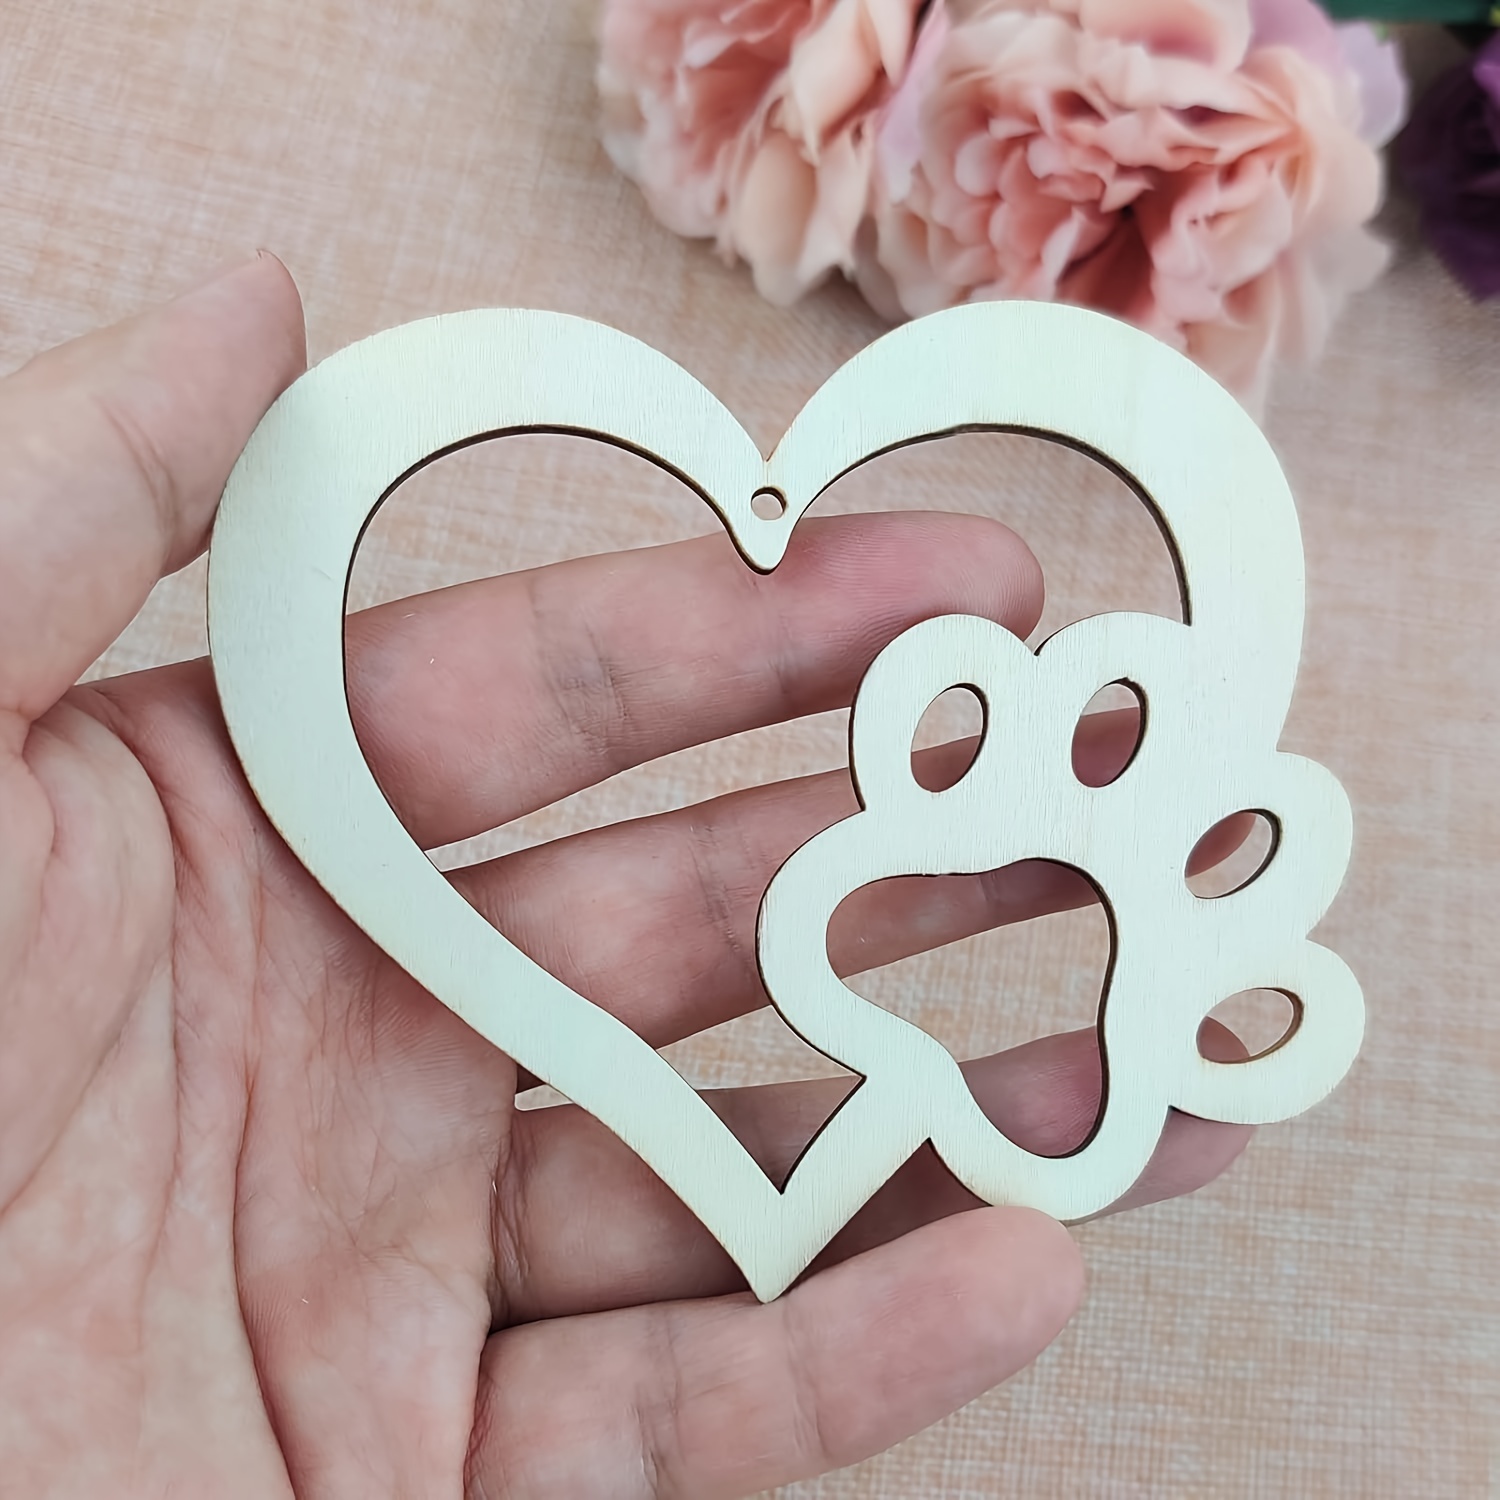 20pcs Wooden Heart Cutouts Crafts Heart Shaped Wood Hanging Ornaments Gift  Tags with Twines for DIY Project Wedding Valentine's Day Party Decorations